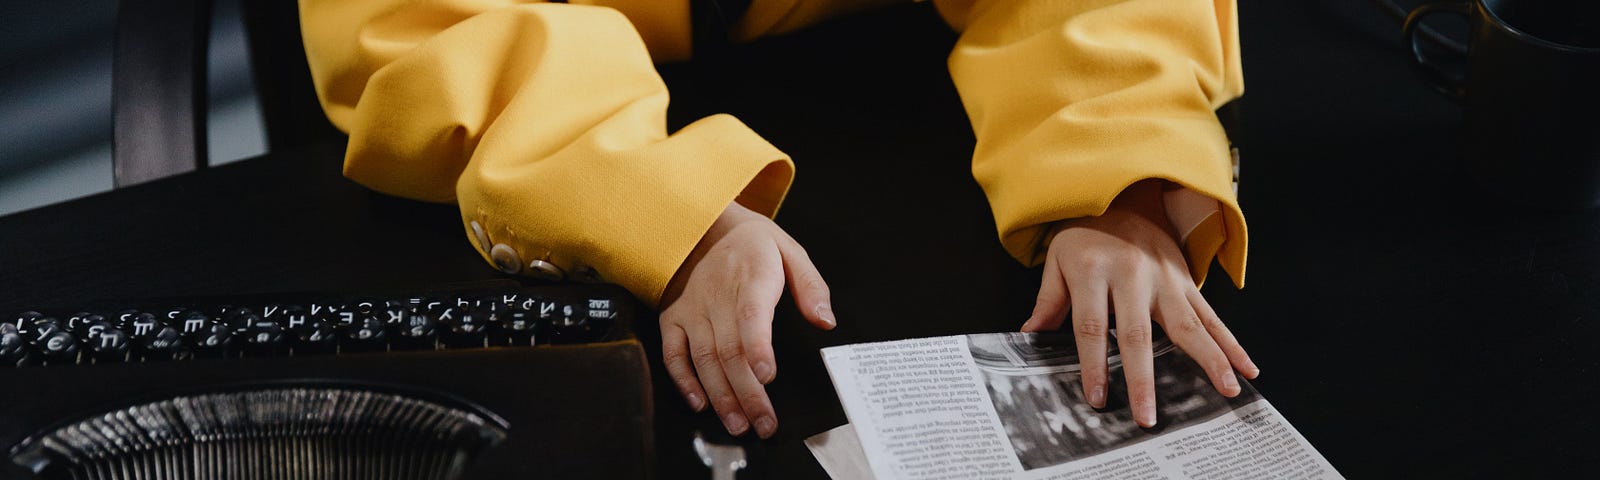 A child’s hands, in a yellow jacket, adjust a newspaper with a typewriter nearby